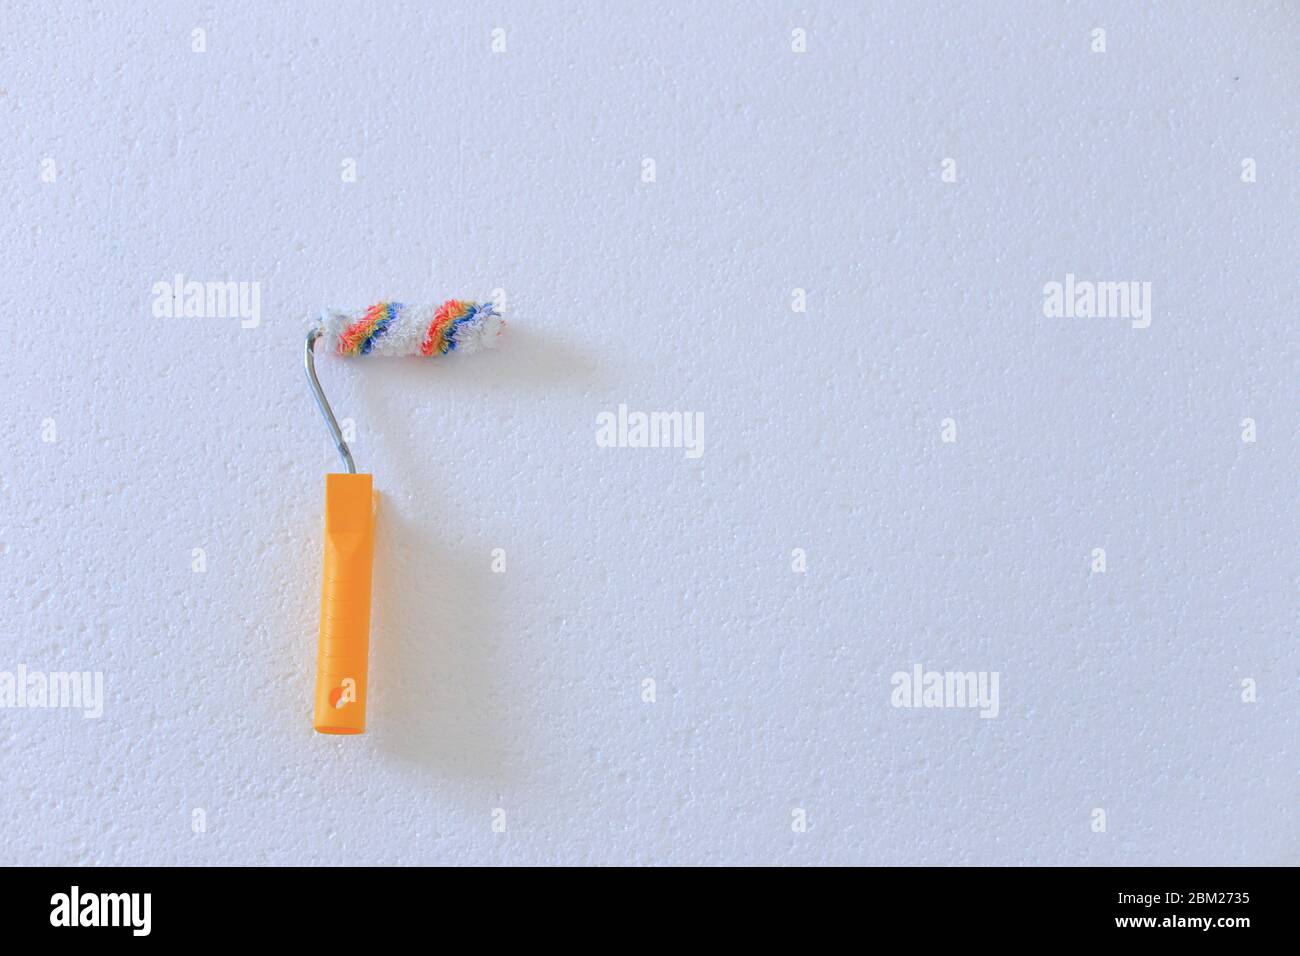 Paint roller for painting on a white background Stock Photo